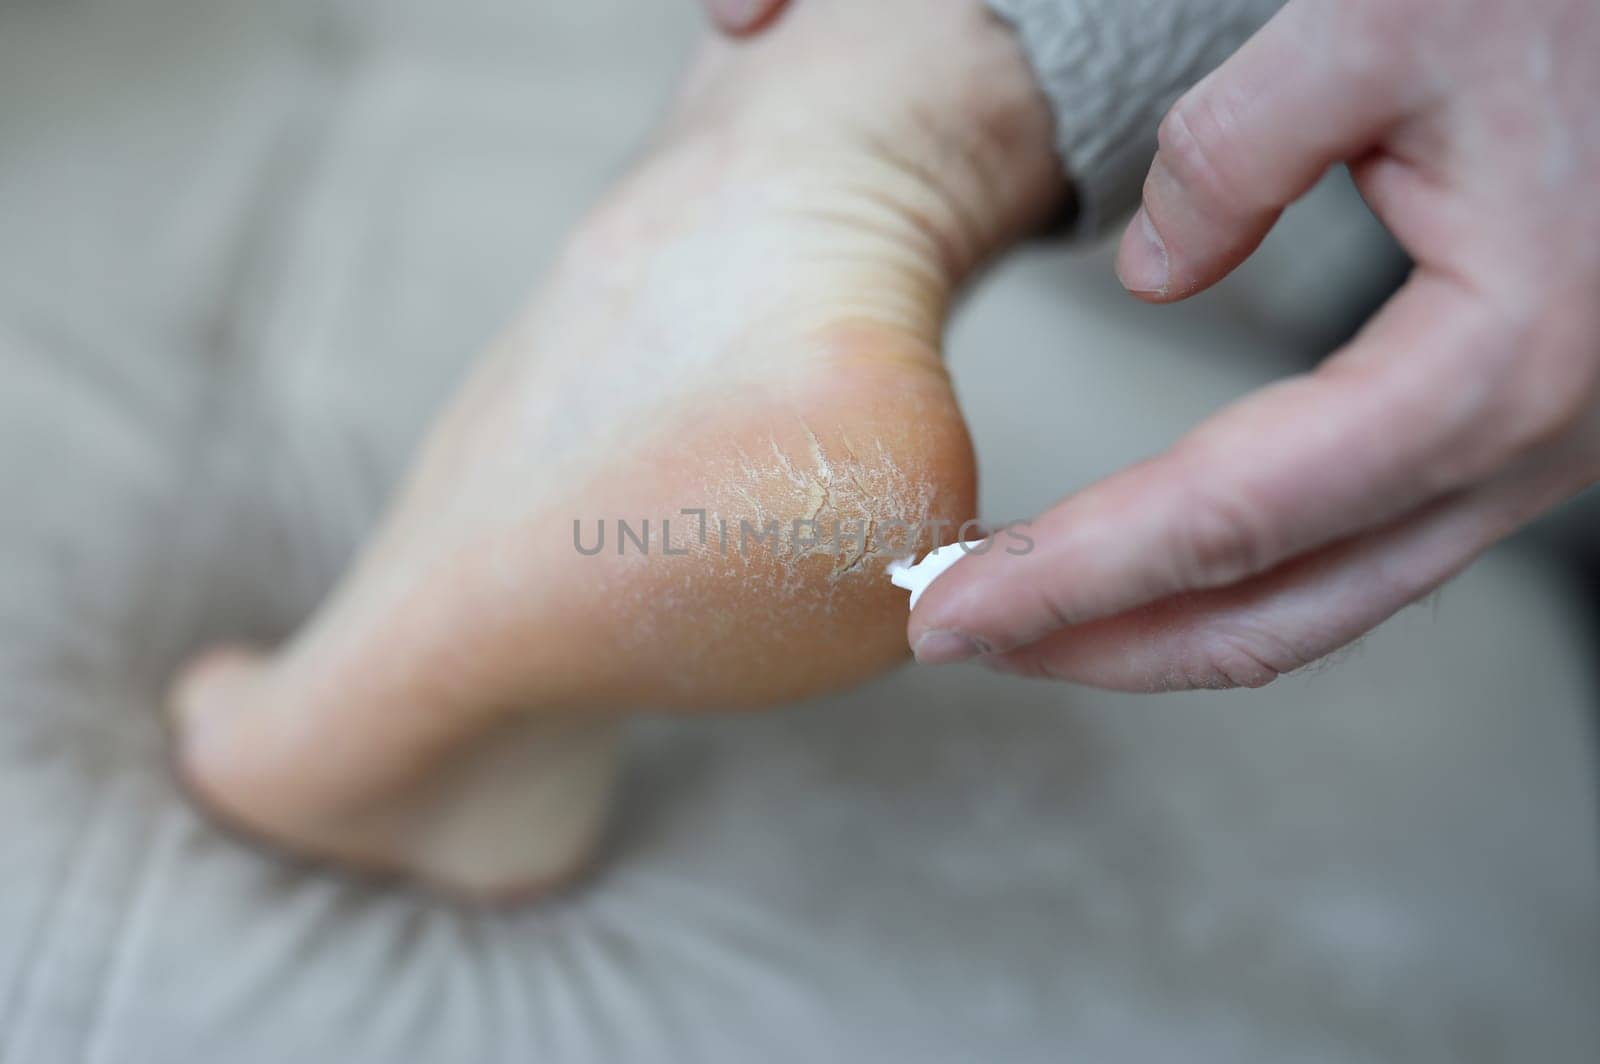 Close-up of person applying smoothing cream on damaged and problem areas on skin. Barefoot man with unhealthy and unattractive heel. Effect of uncomfortable shoes